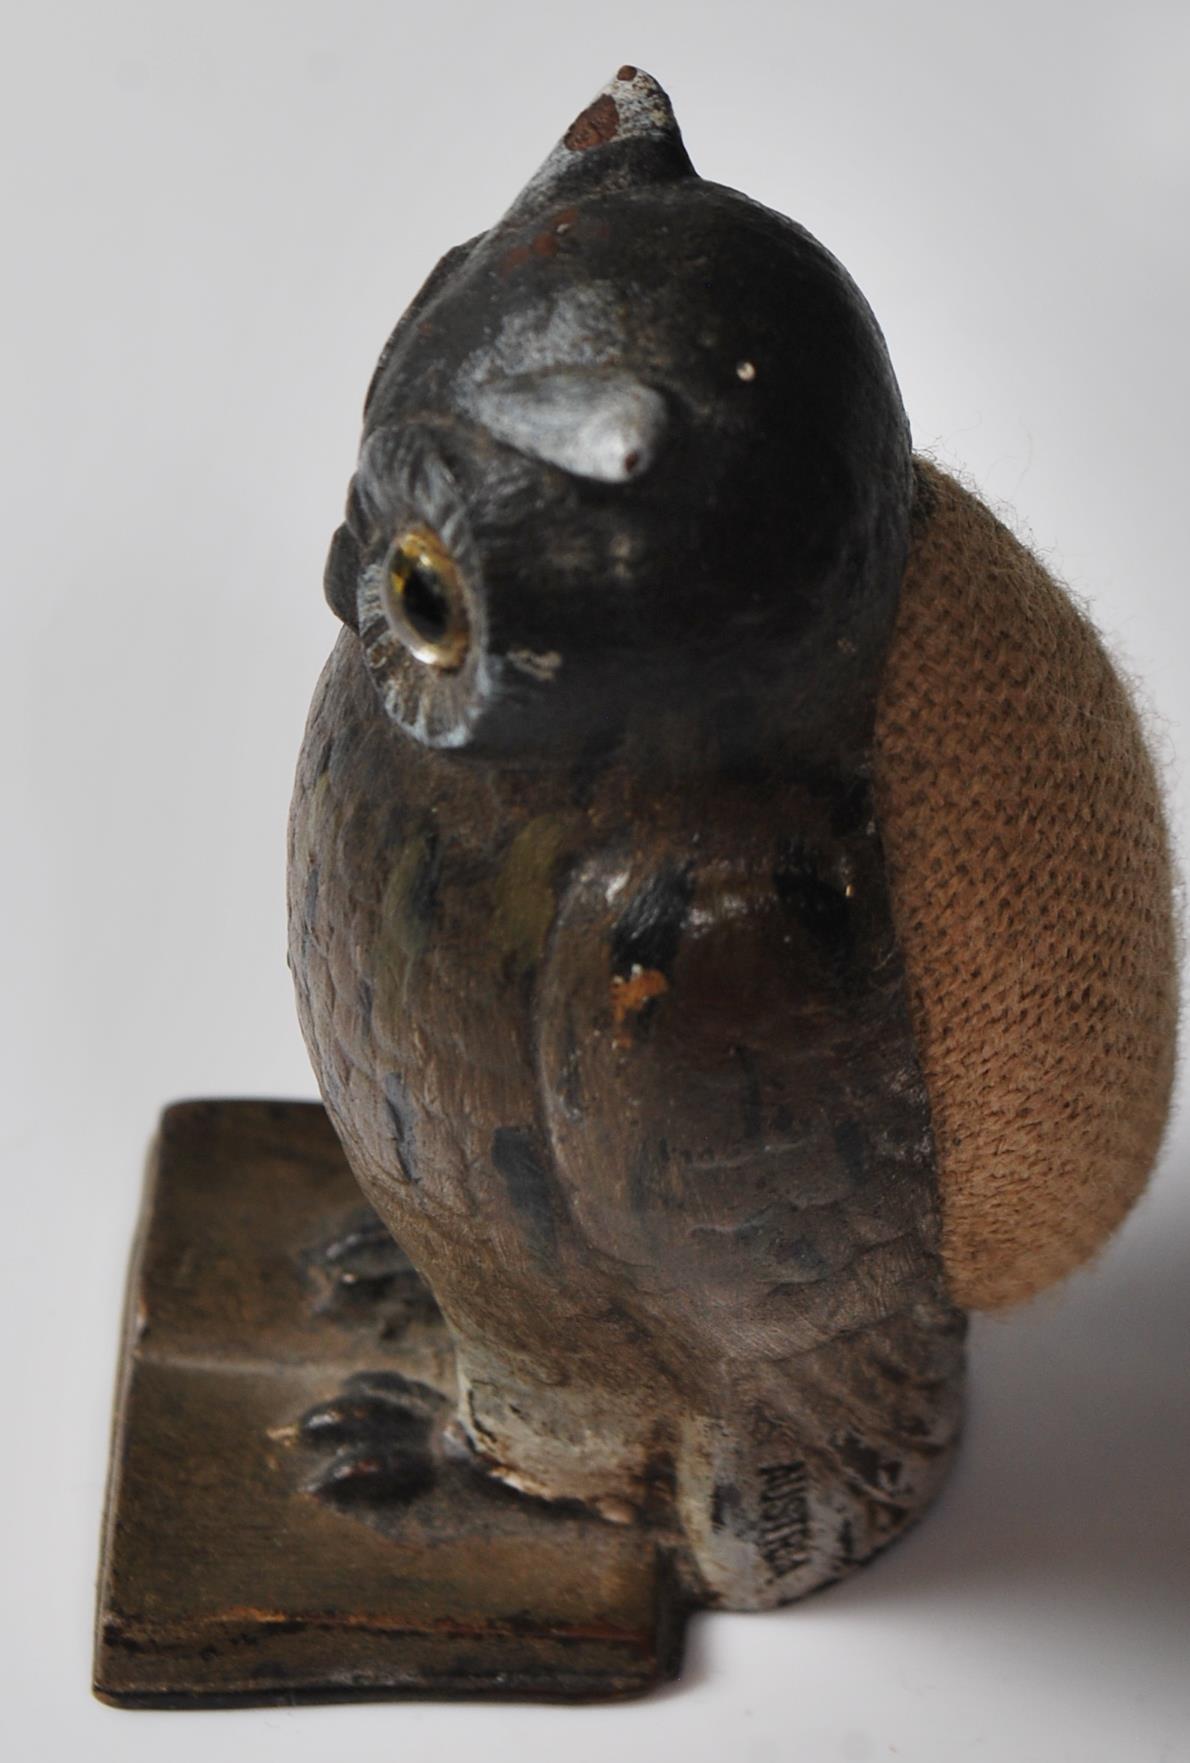 ANTIQUE VICTORIAN STYLE BRASS PINCUSHION IN THE FORM OF AN OWL - Image 2 of 5